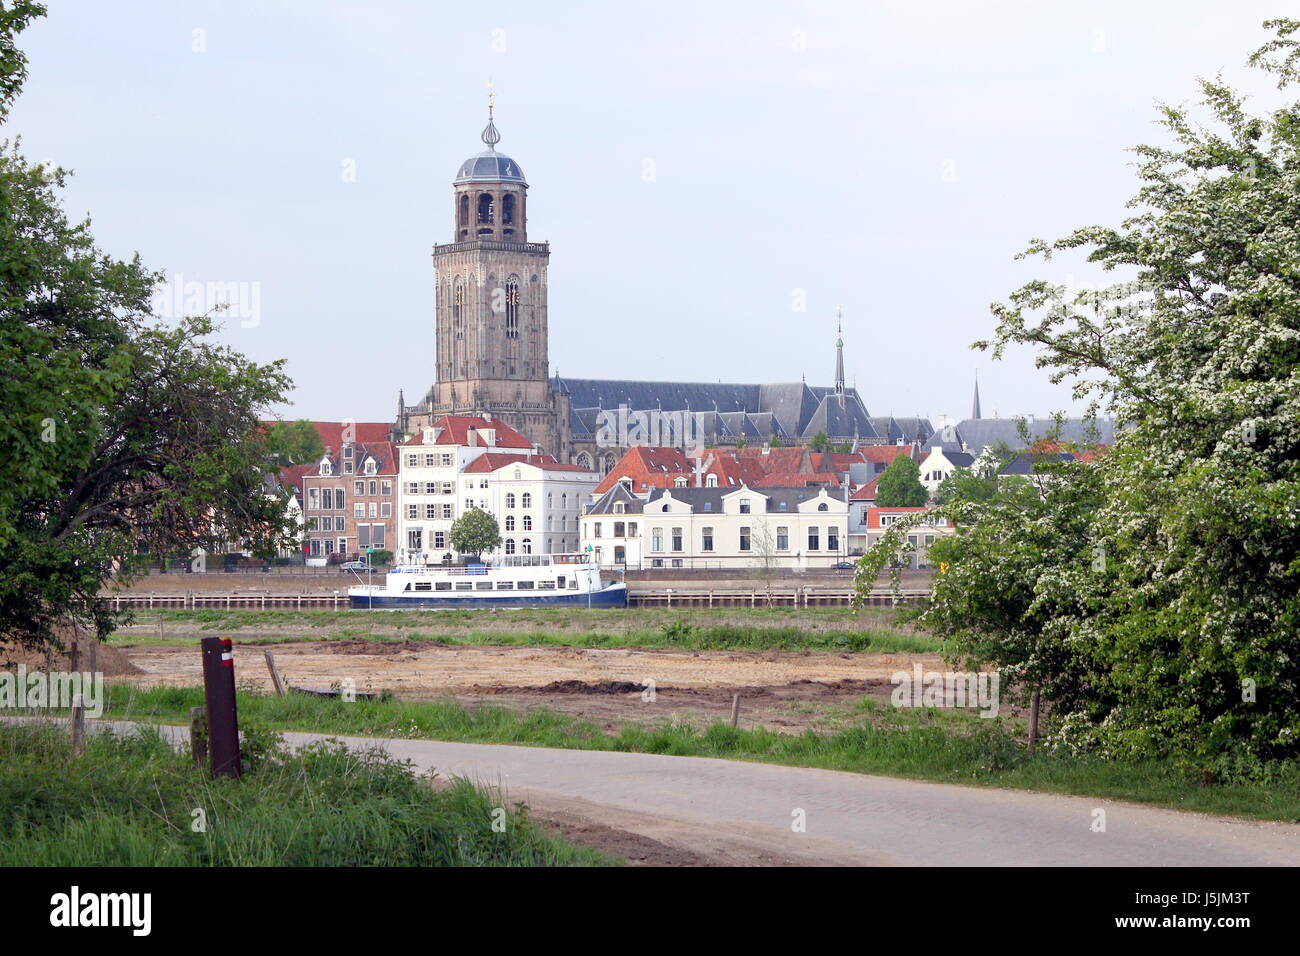 Panorama of the IJssel River at Deventer, Netherlands. City skyline with St. Lebuinus Church (Grote or Lebuïnus Kerk). Stock Photo